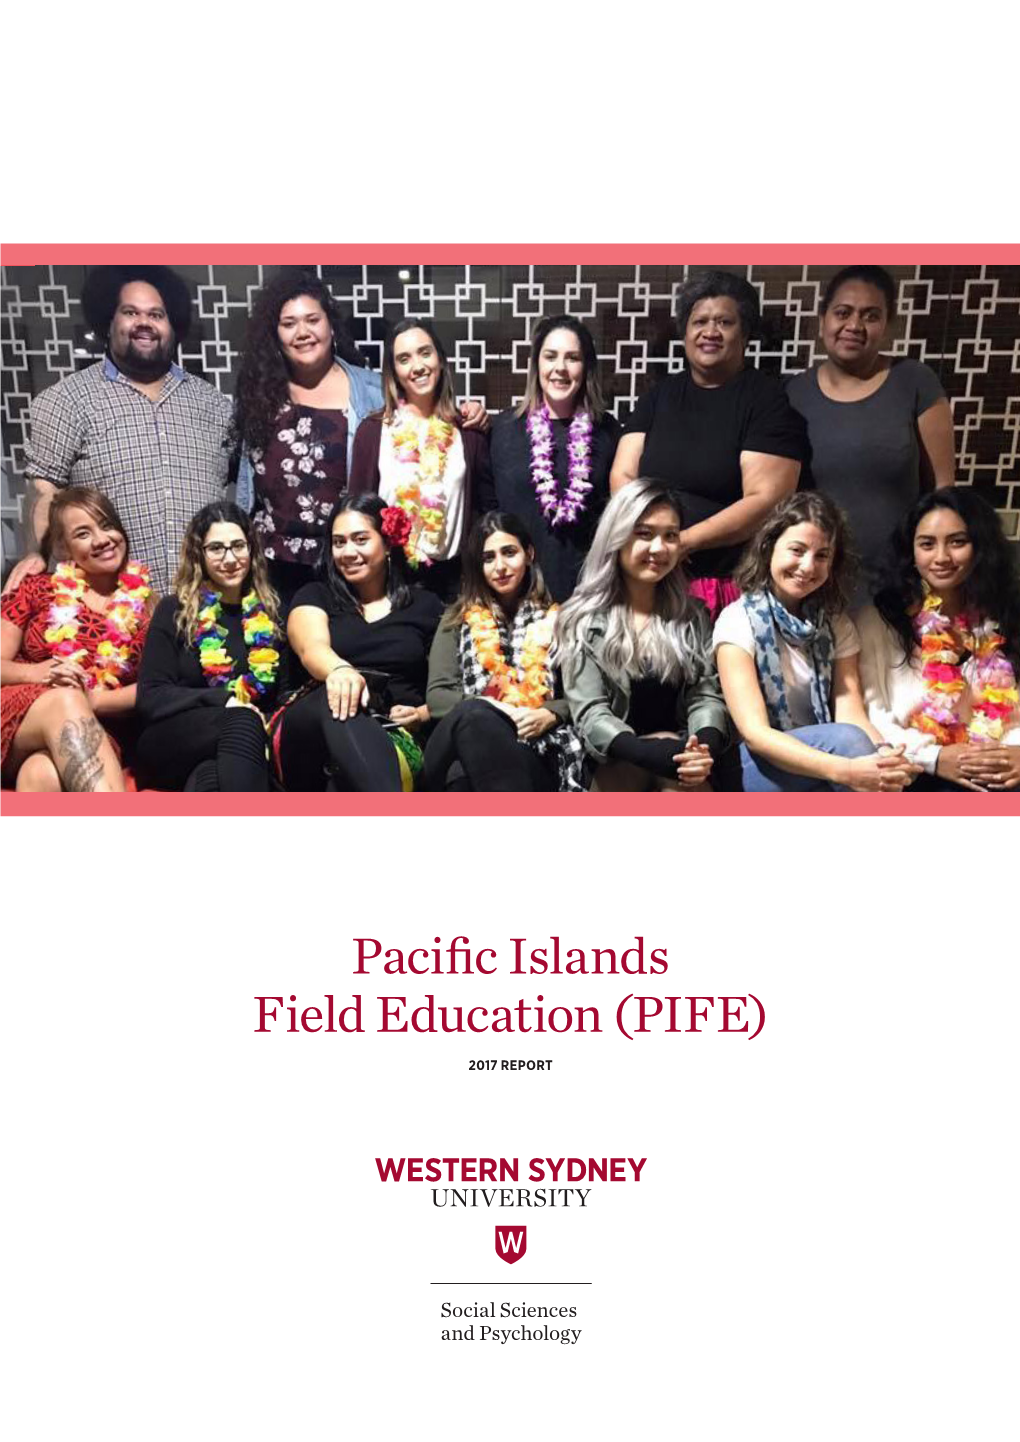 Pacific Islands Field Education (PIFE) 2017 REPORT